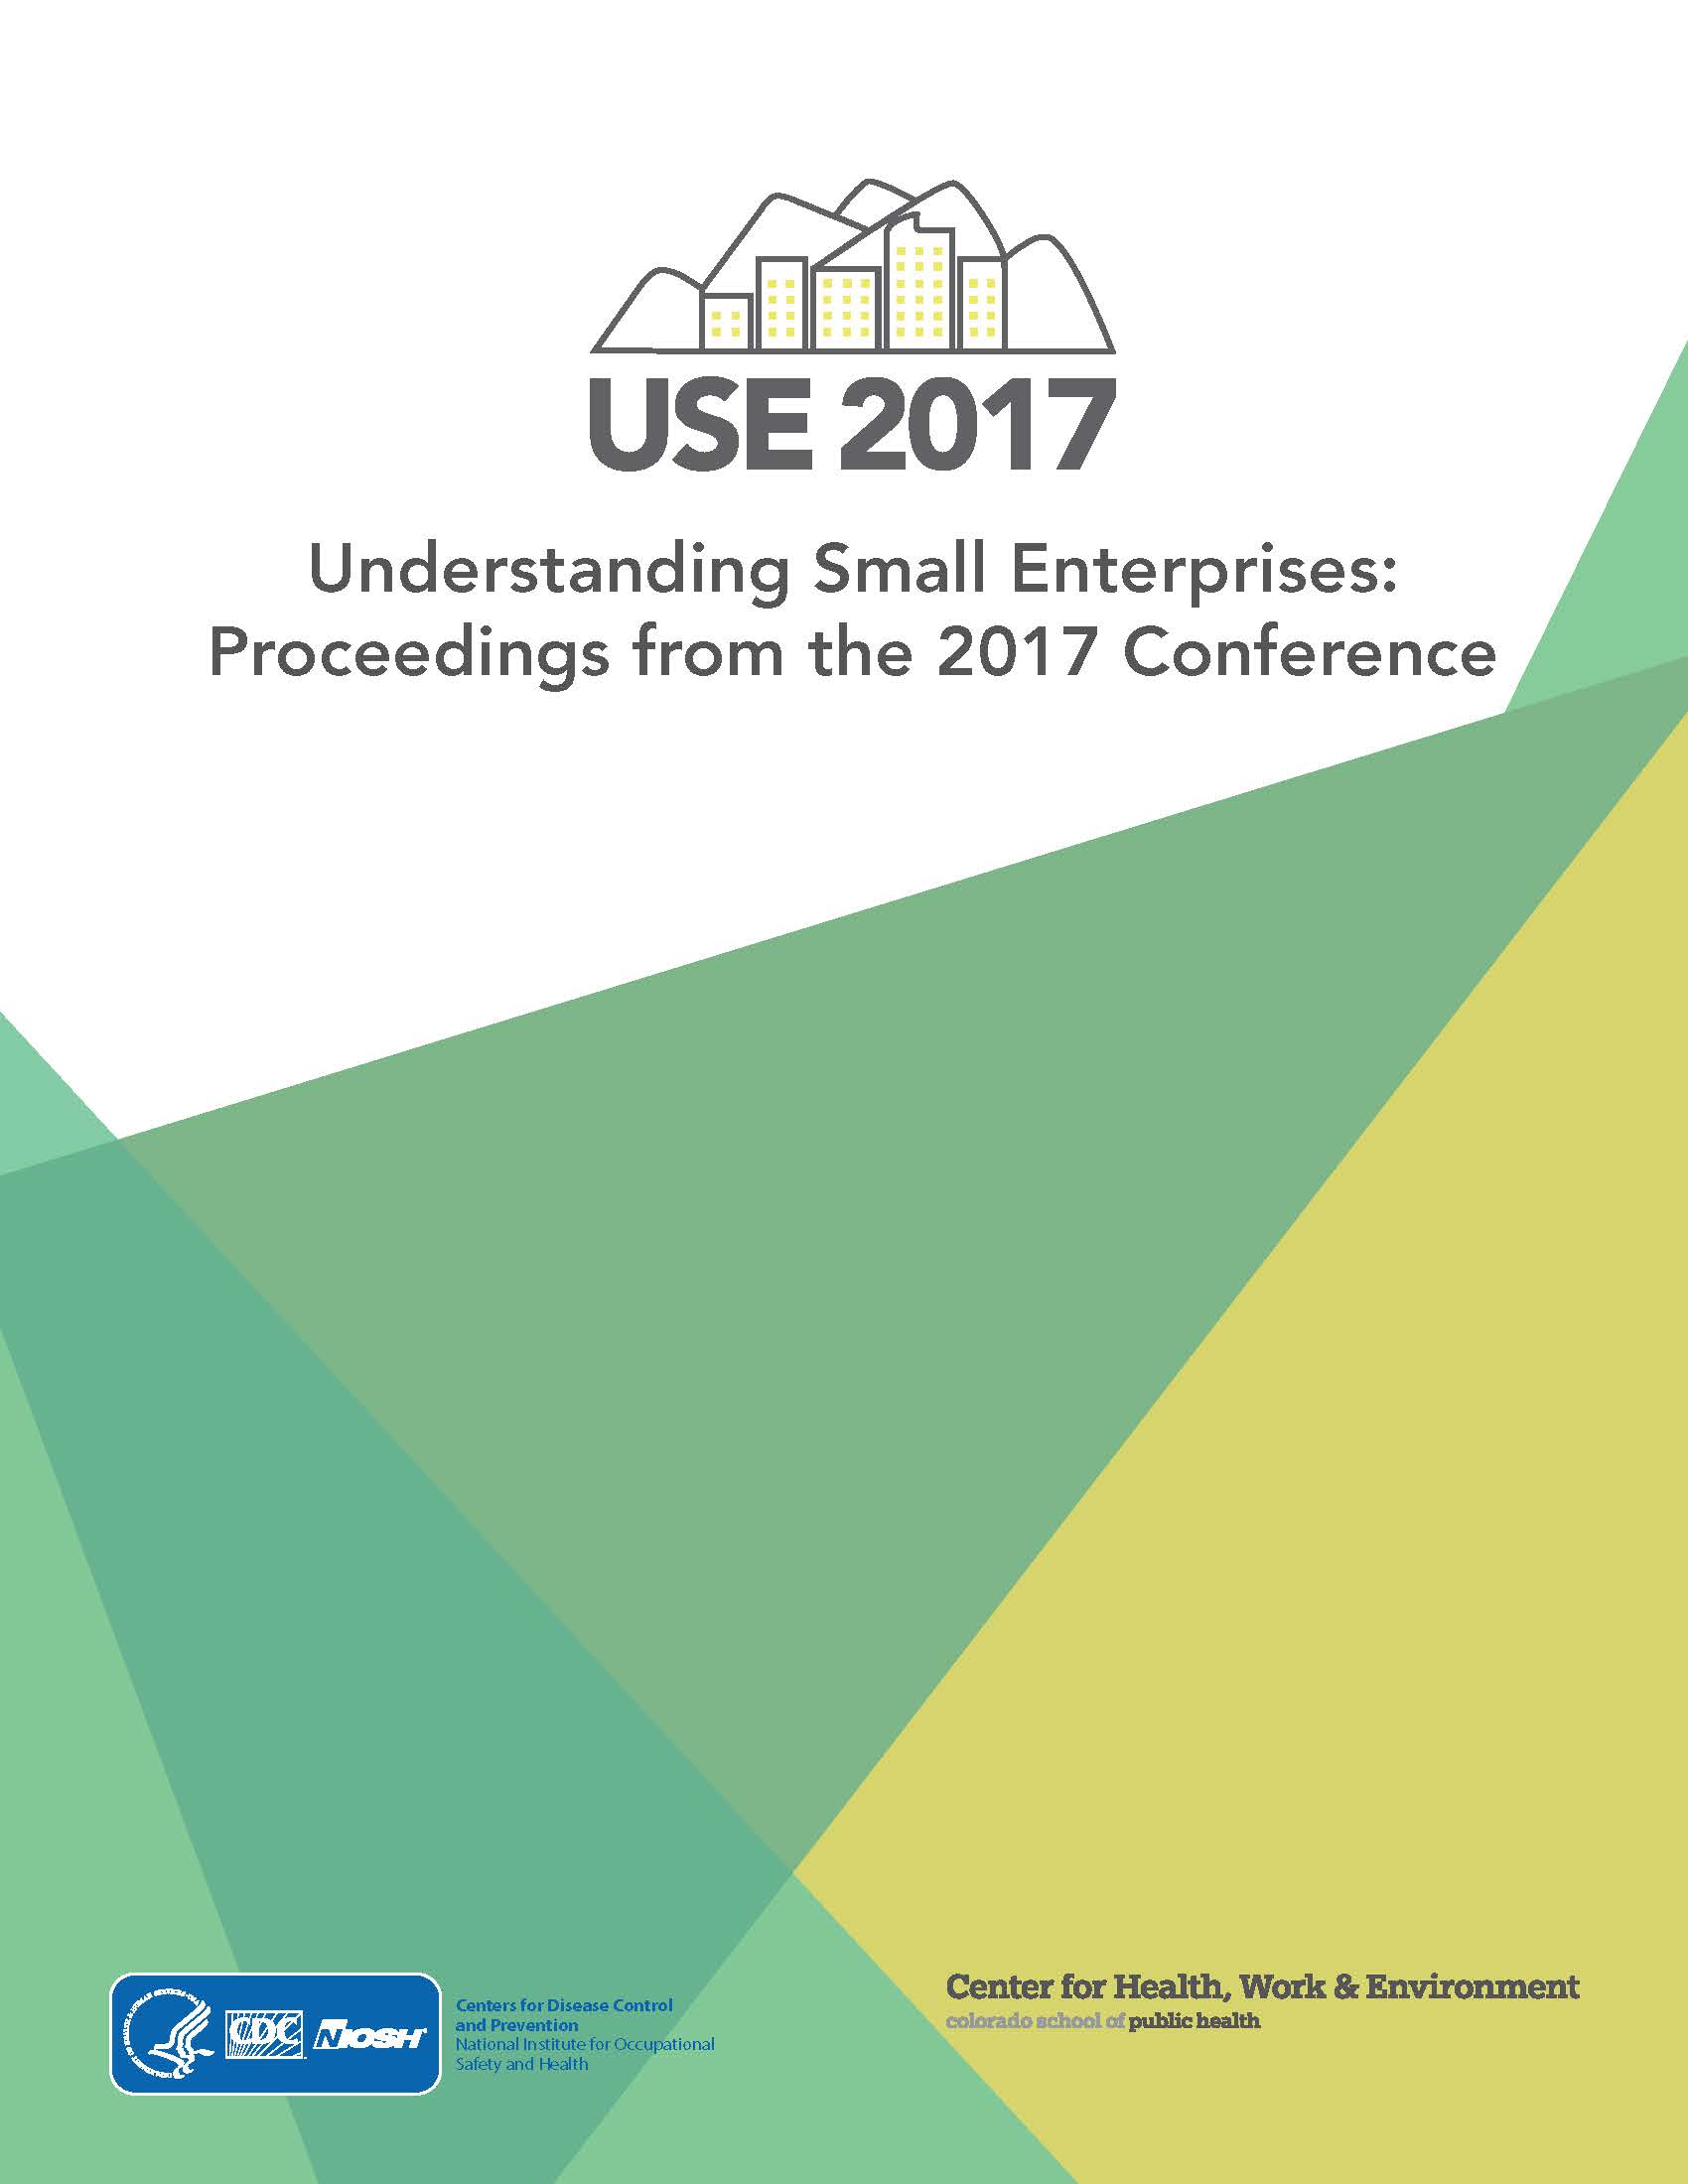 Cover of the 2017 Understanding Small Enterprises conference proceedings